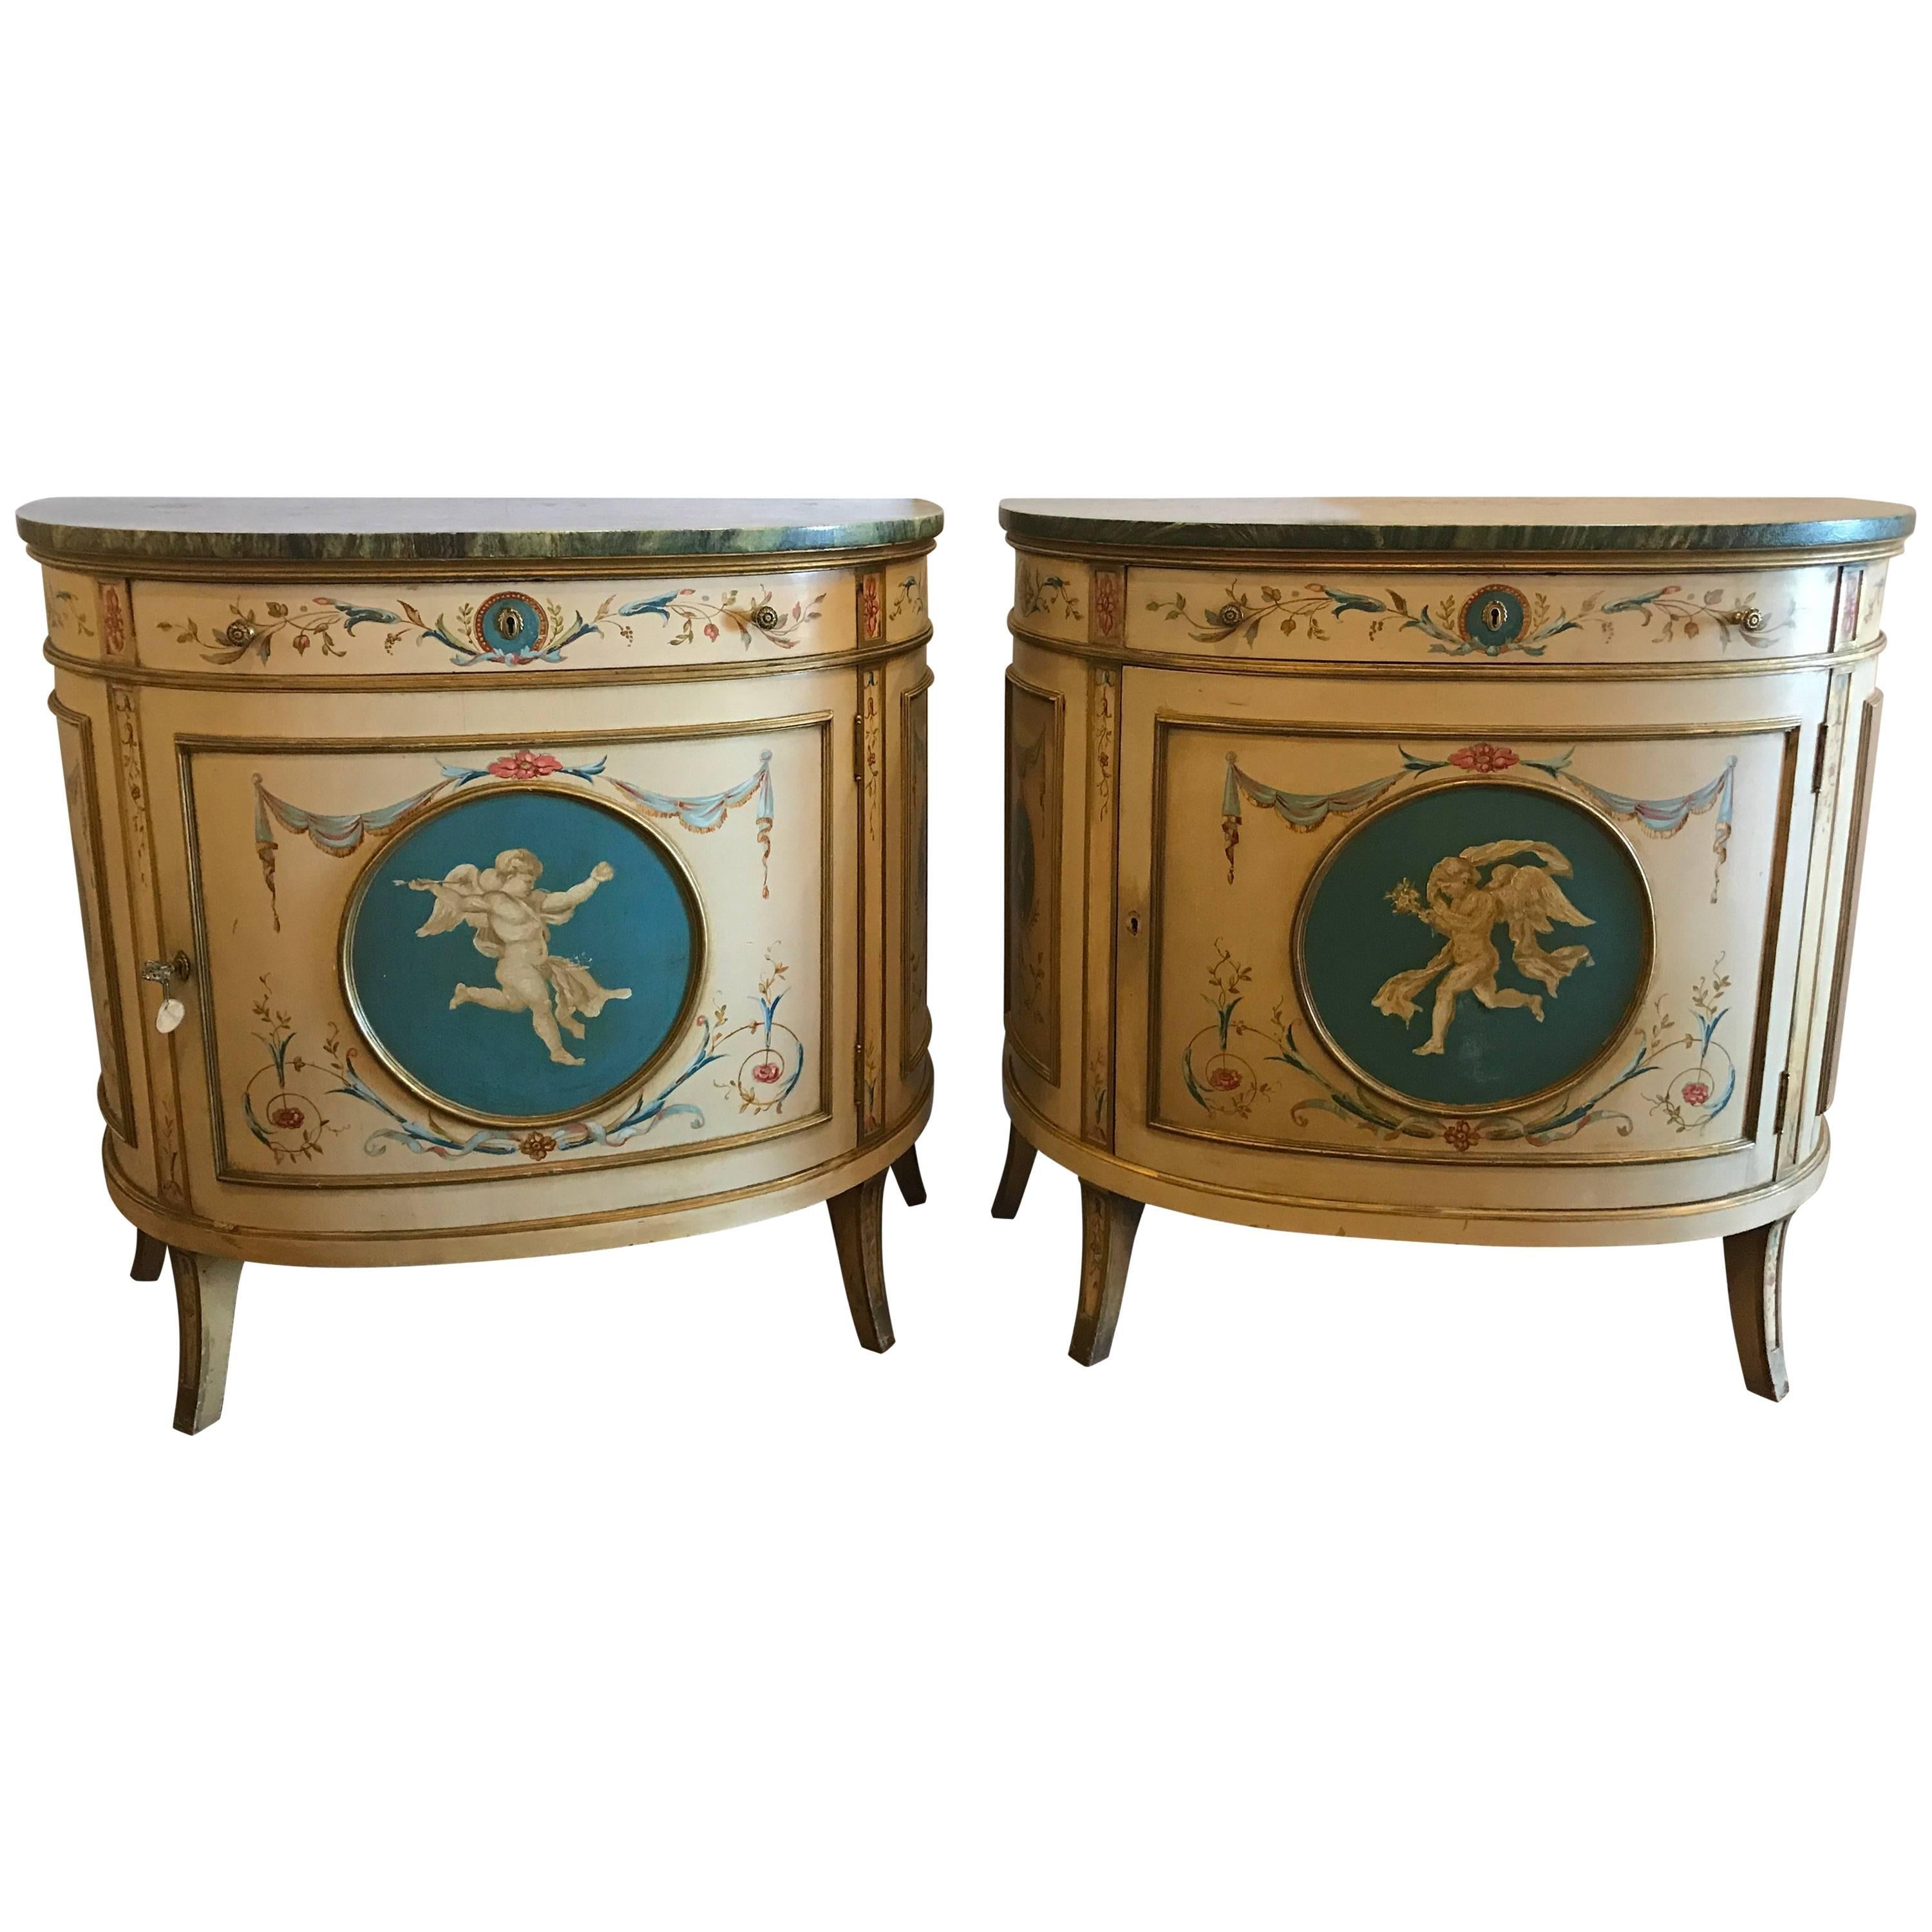 Pair of Adams Style Demilune Painted Commodes or Bedside Chests